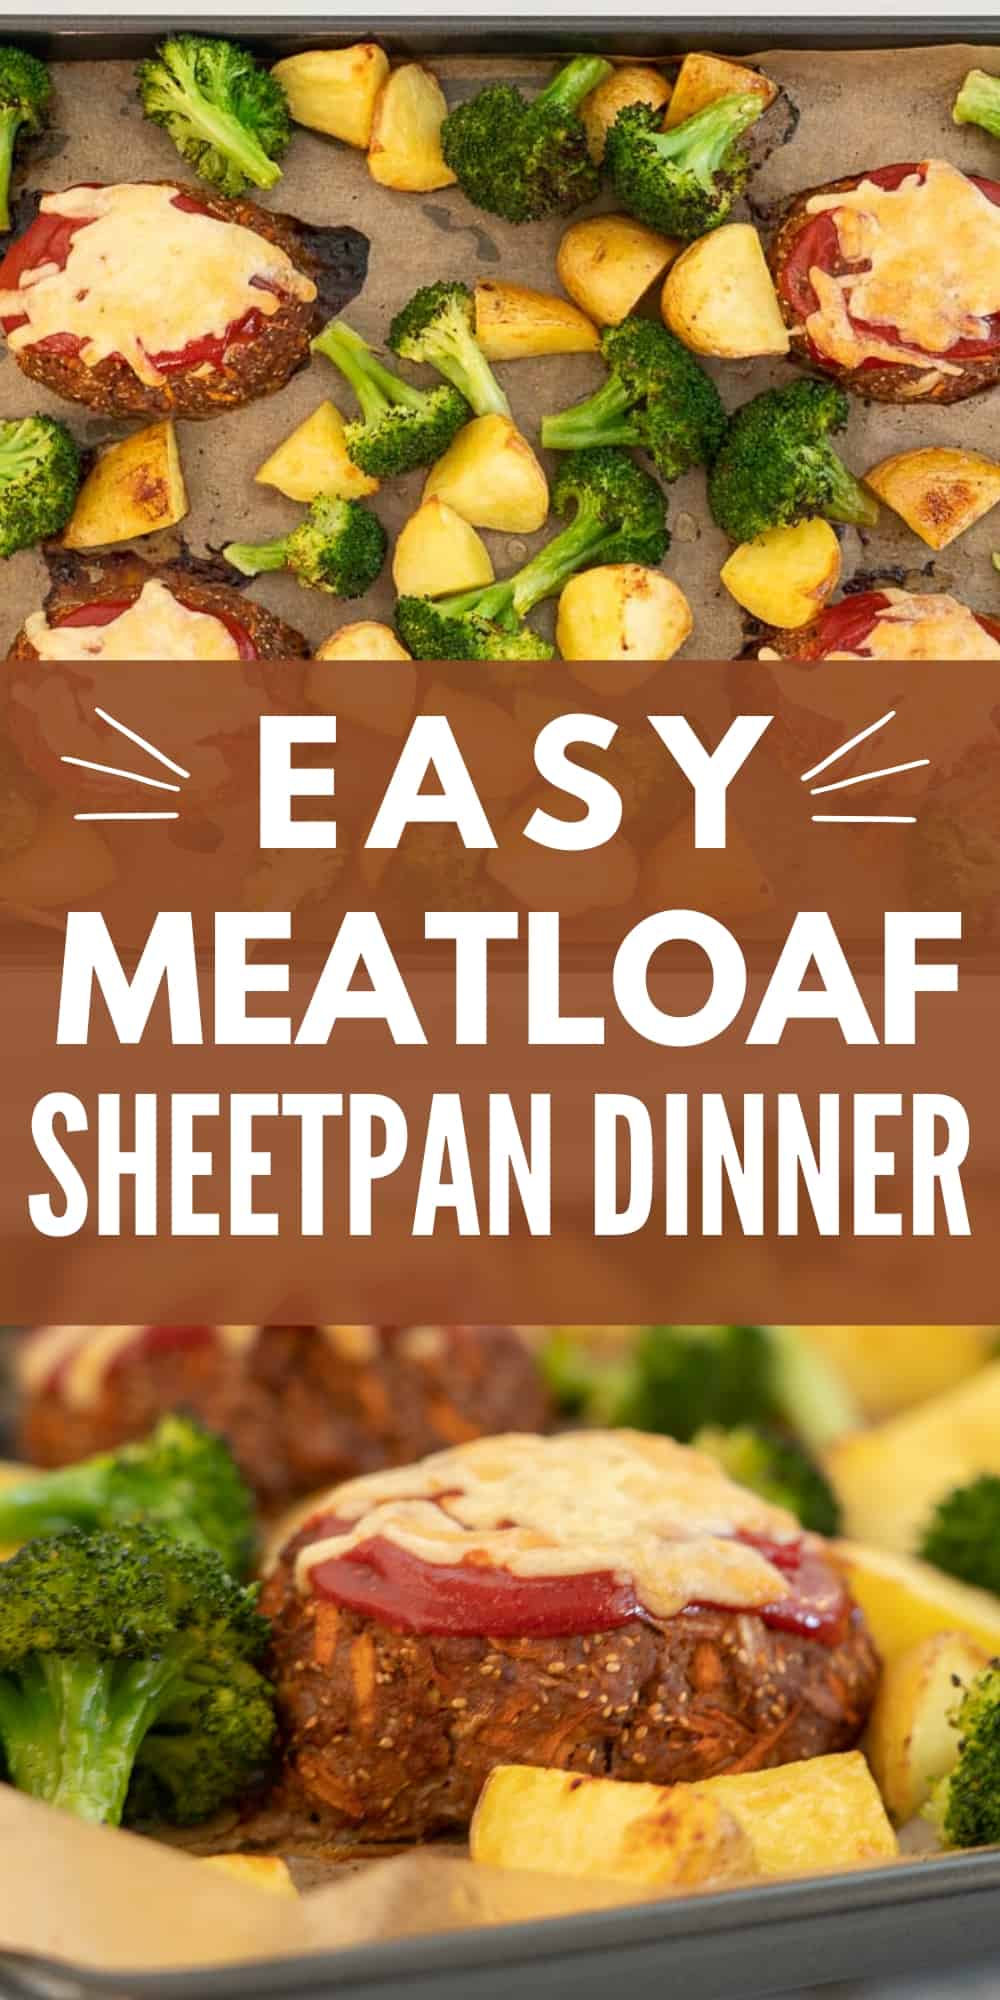 Image for pinterest, meatloaf with a text overlay